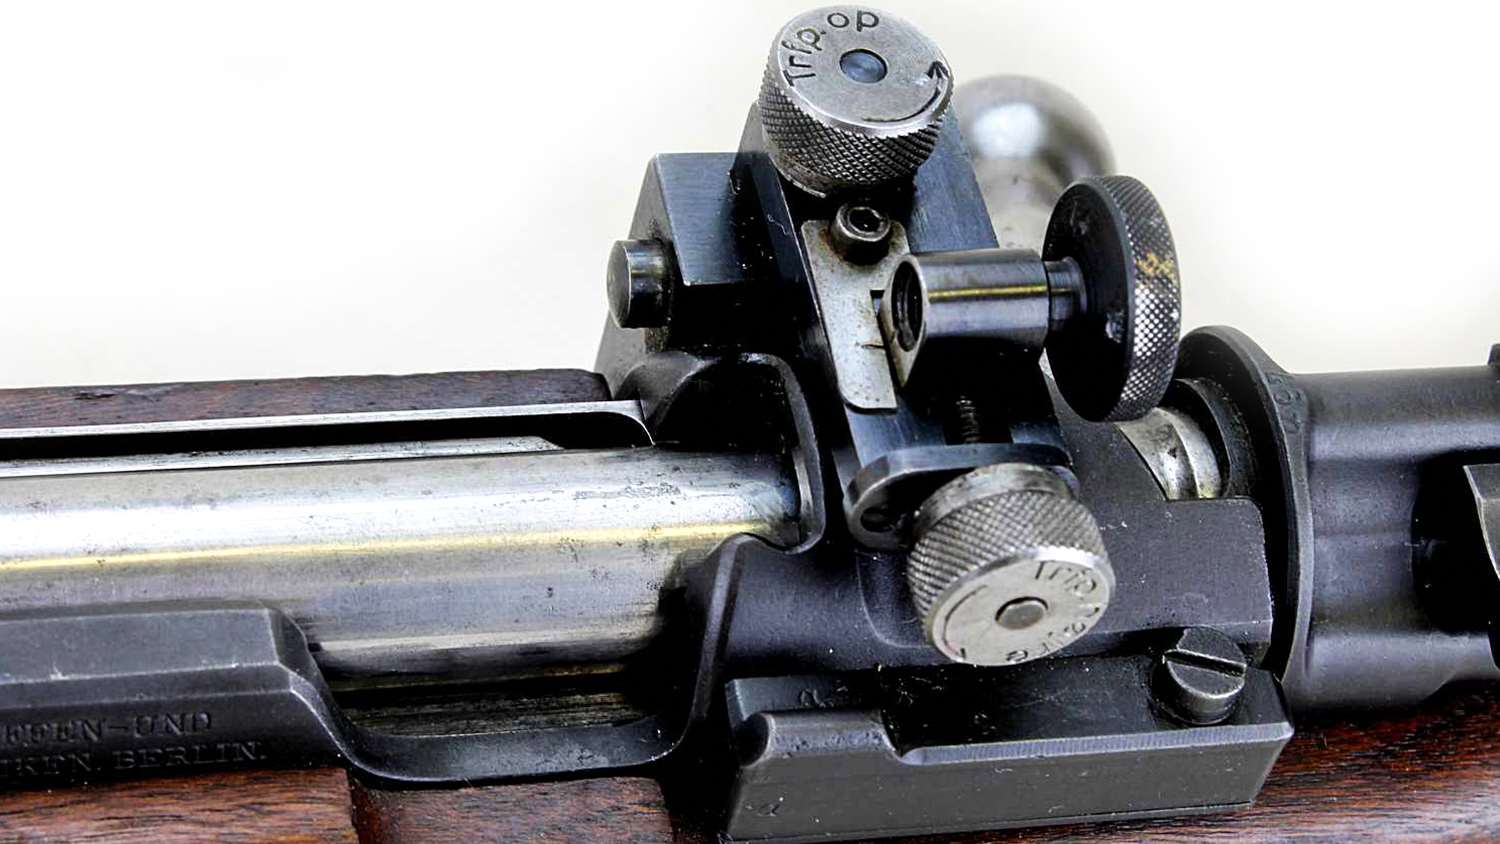 The rear sight appears to be graduated with 10mm clicks. The receiver retains its clip slot for rapid fire stages